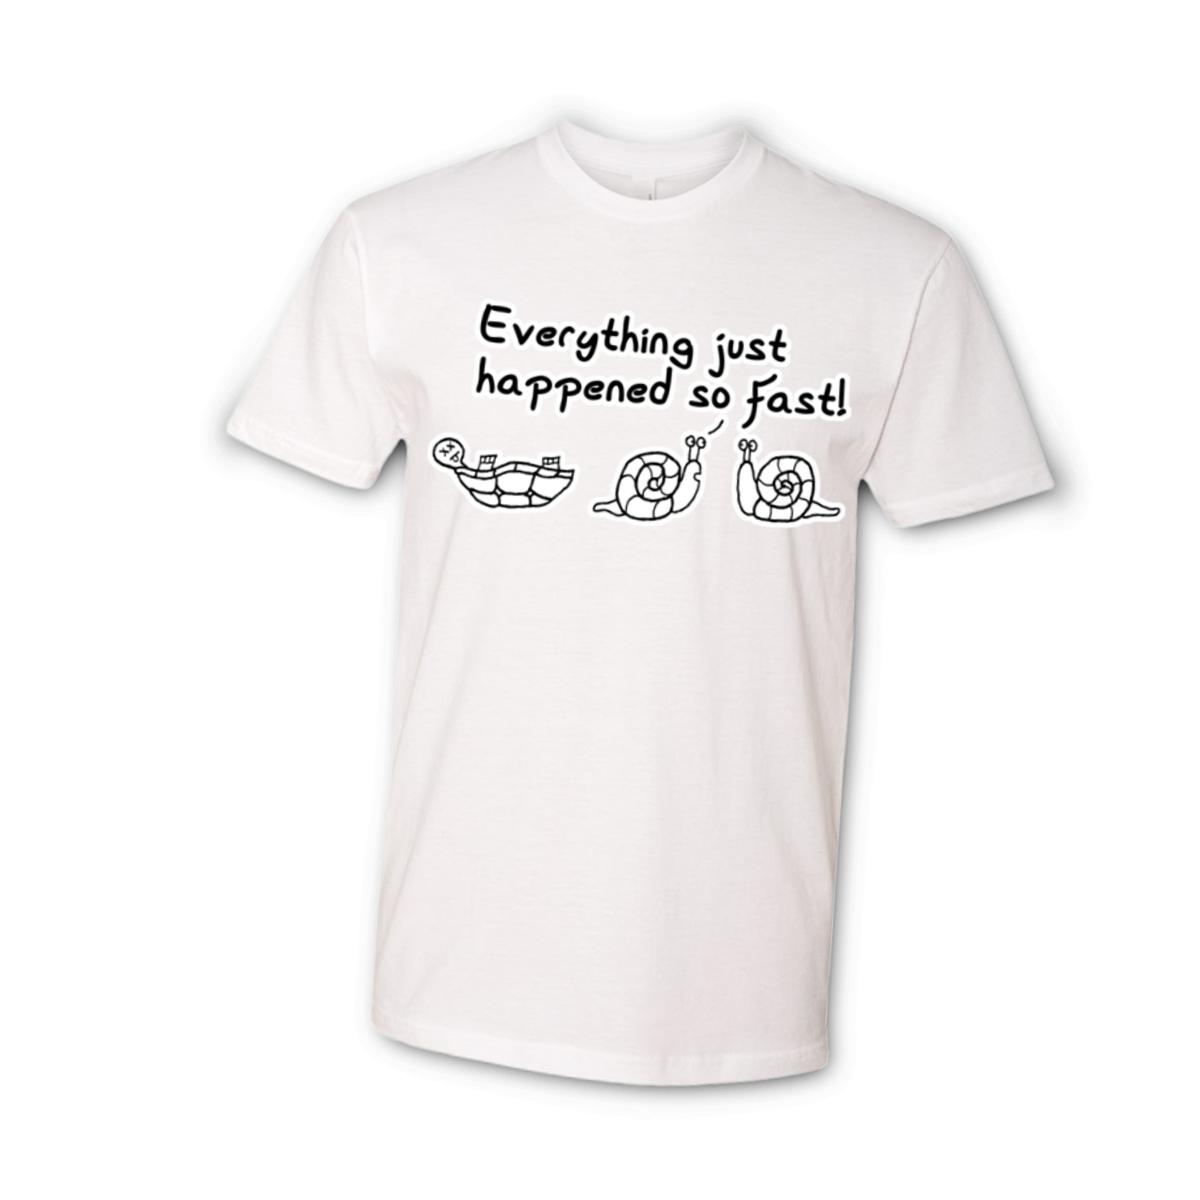 Happened So Fast Unisex Tee Small white